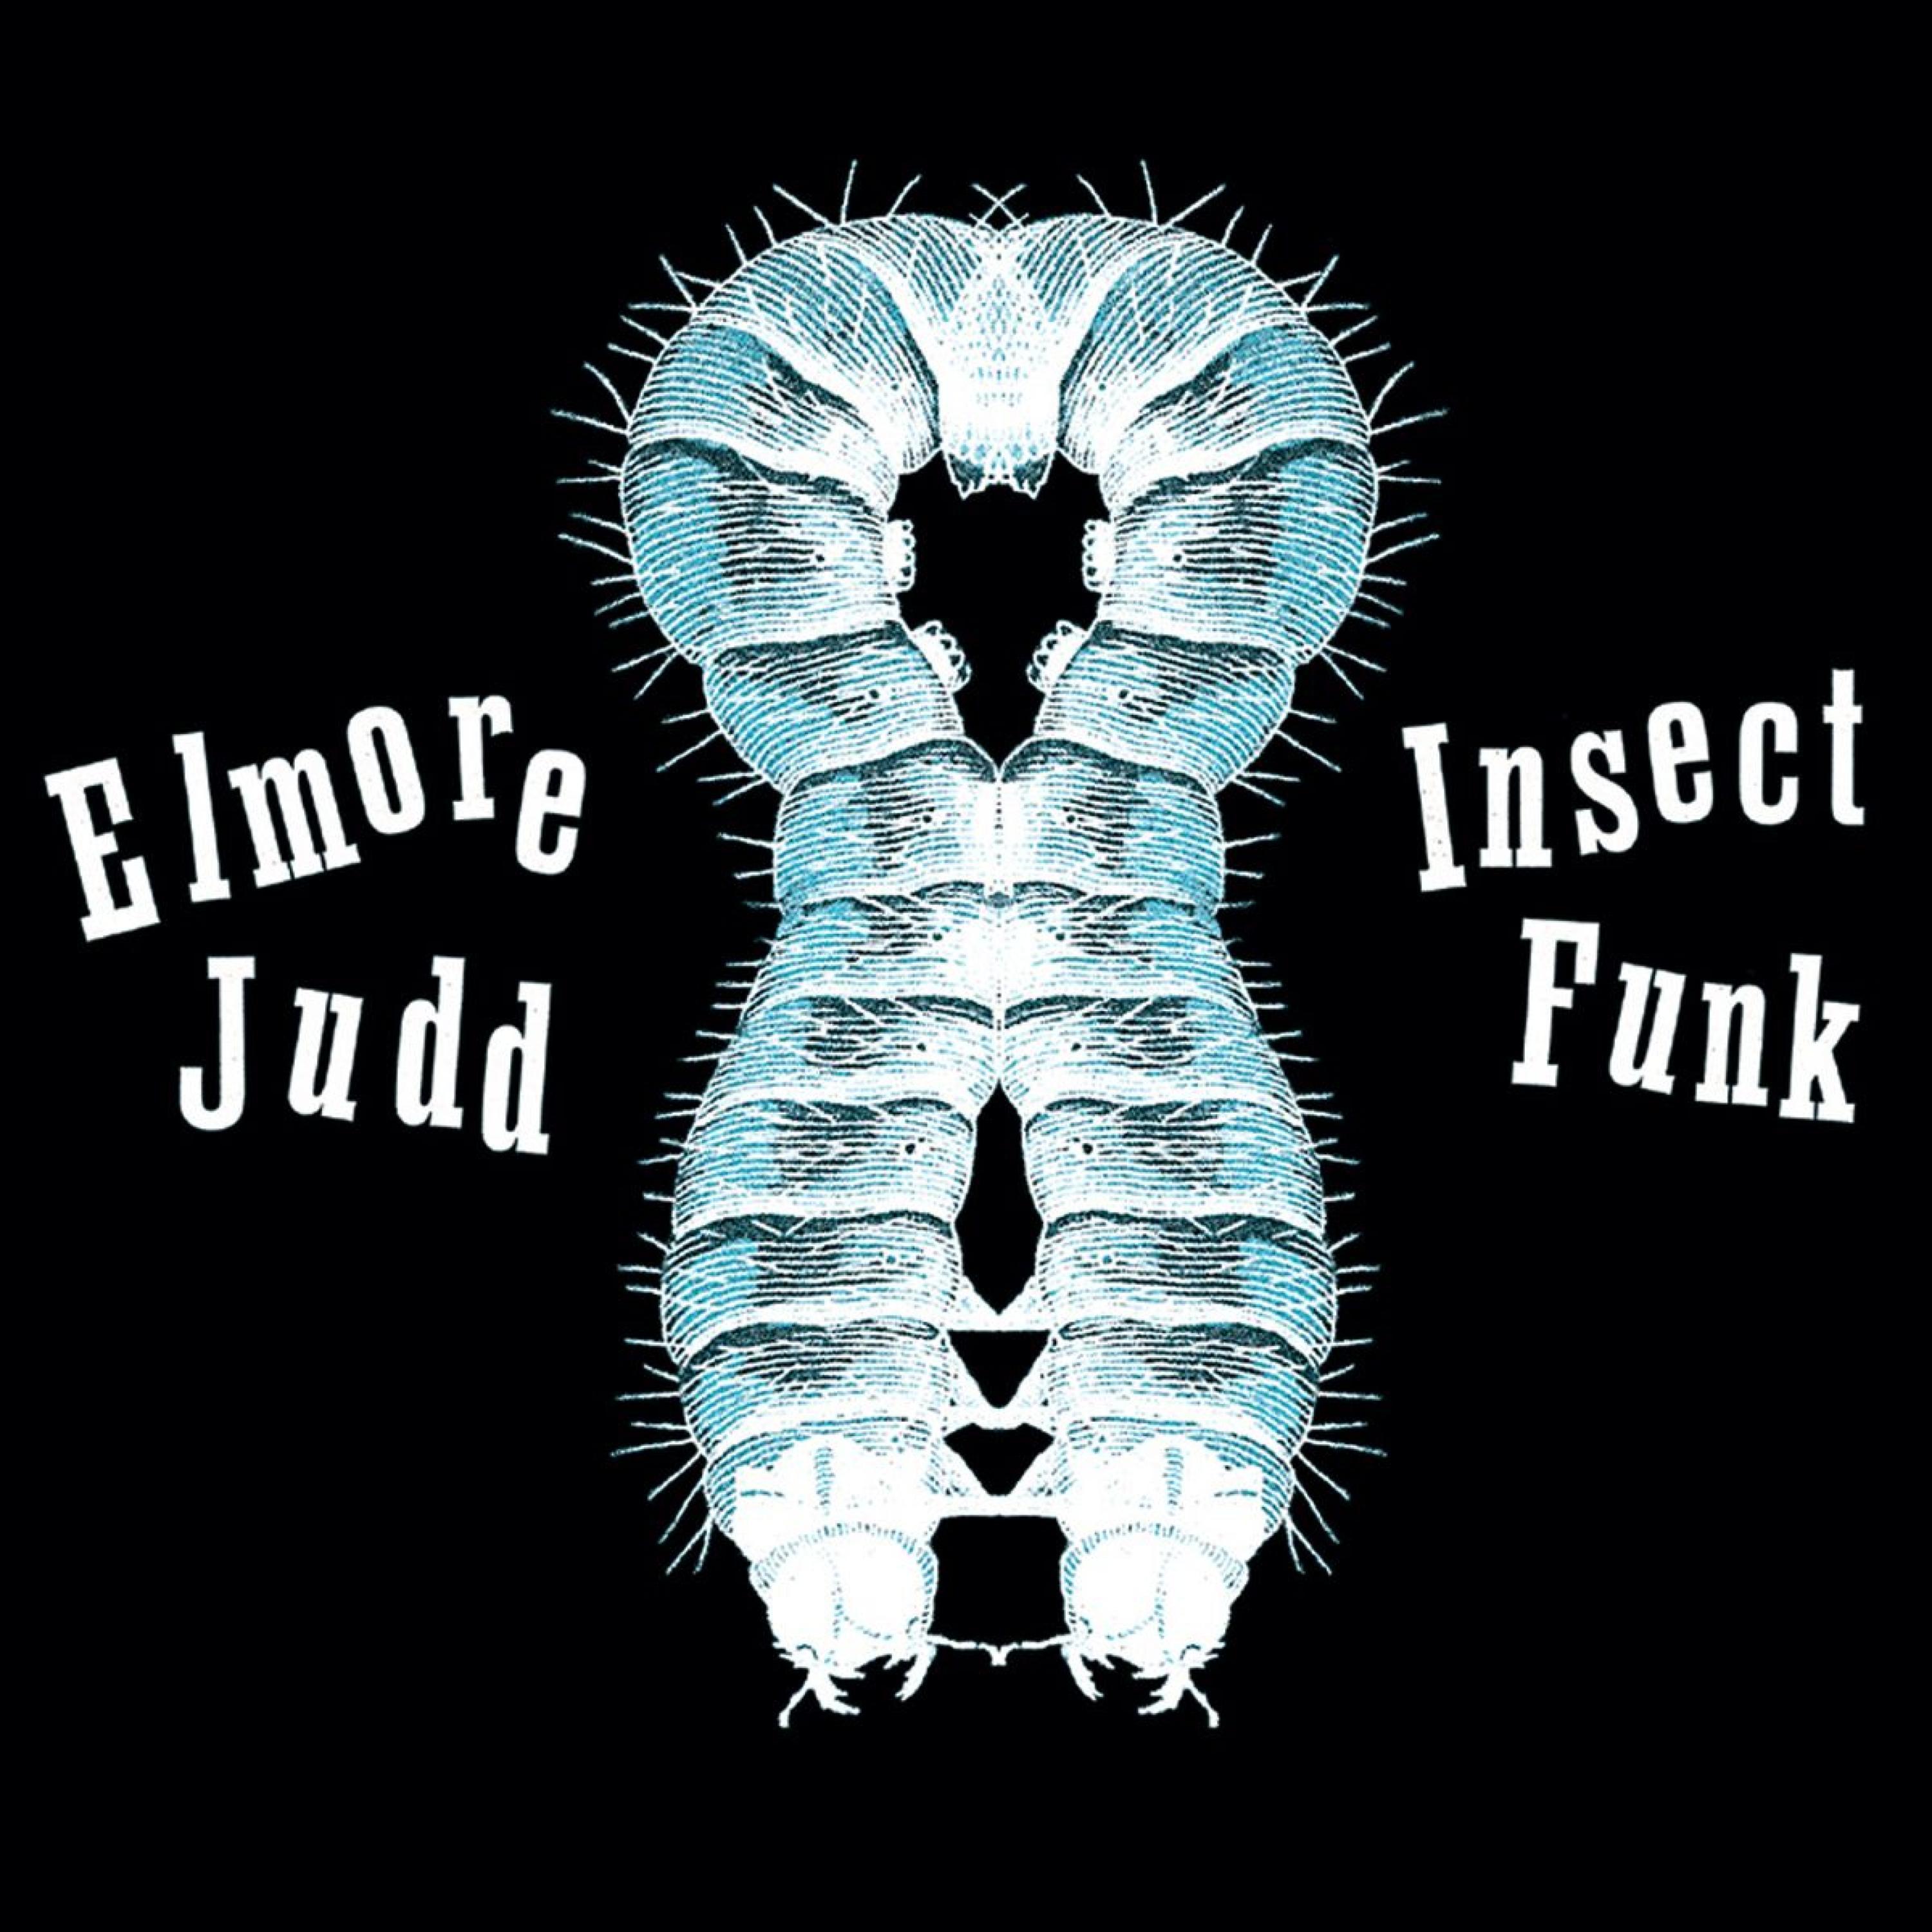 Elmore Judd - Insect Funk